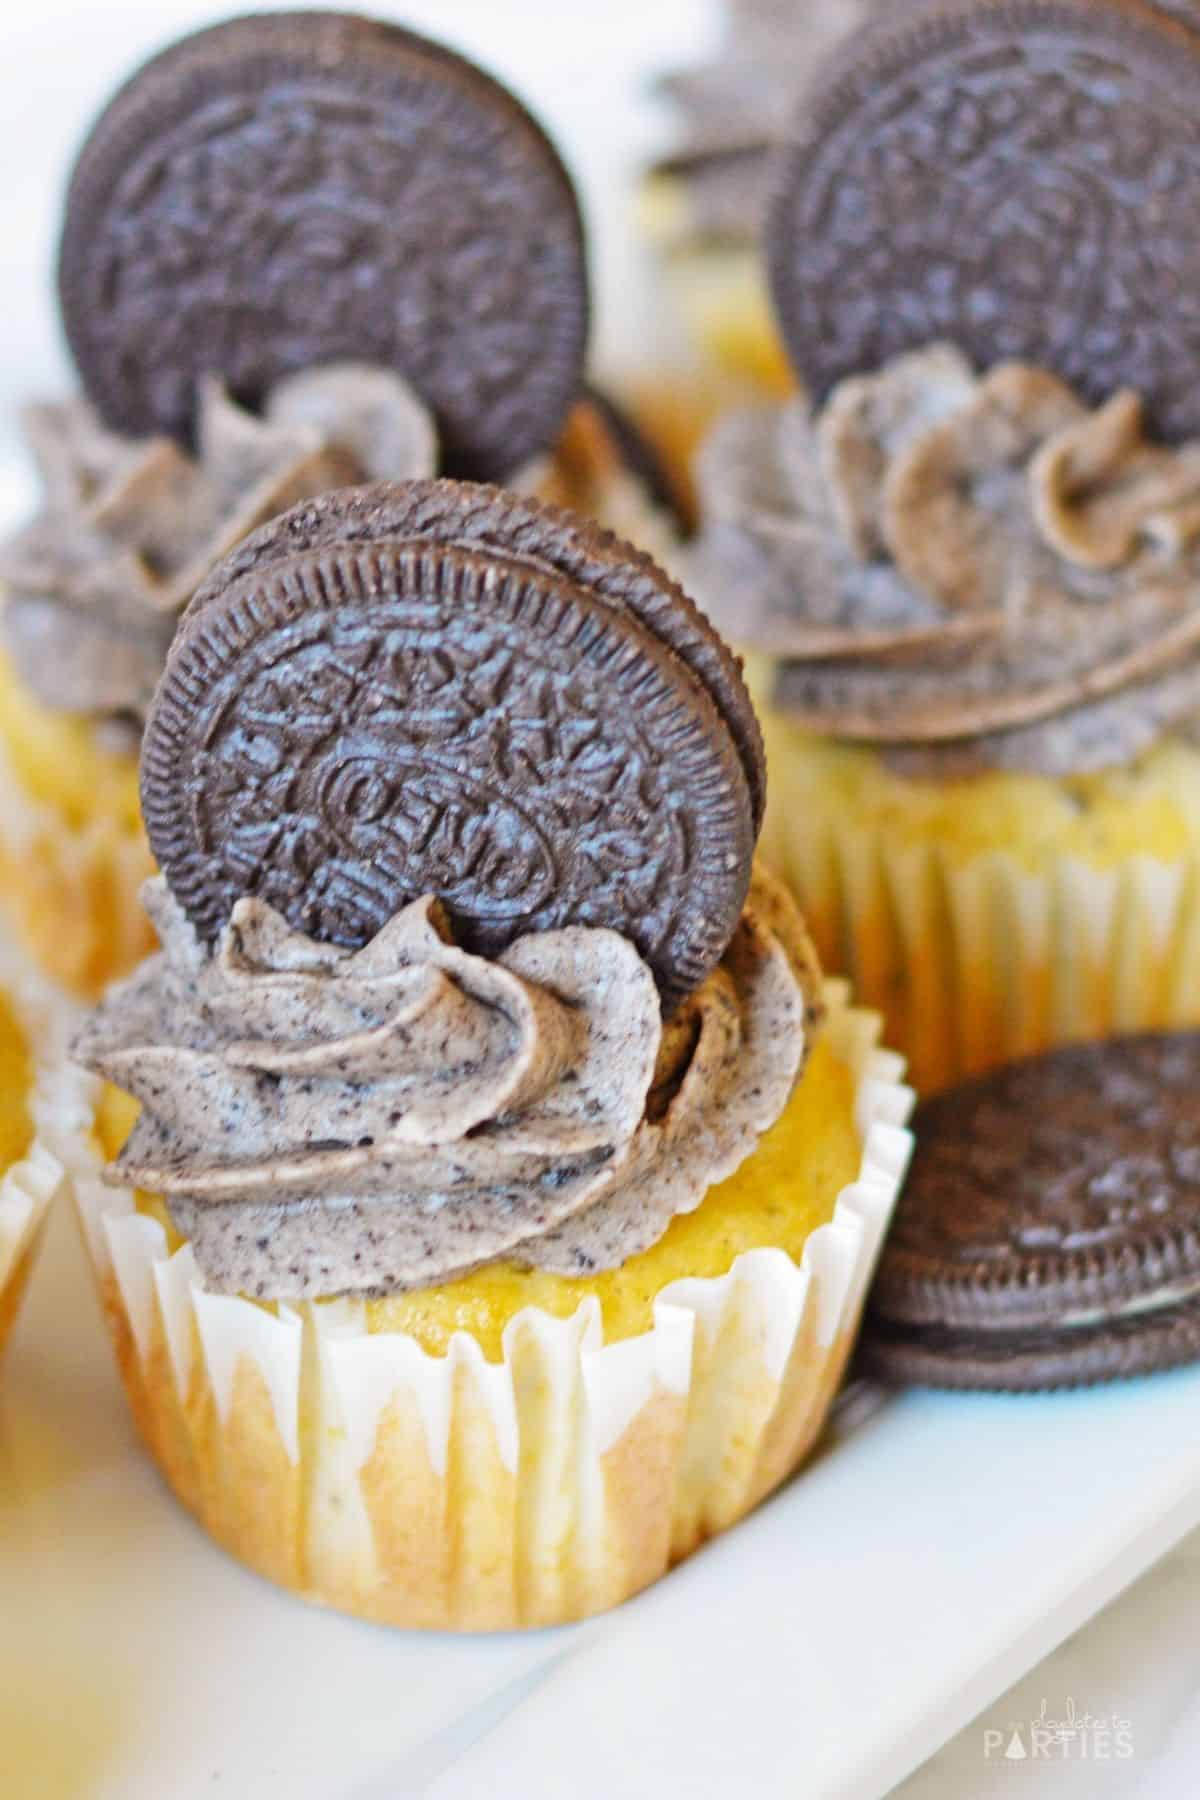 A plate filled with Oreo cupcakes and Oreo cookies.